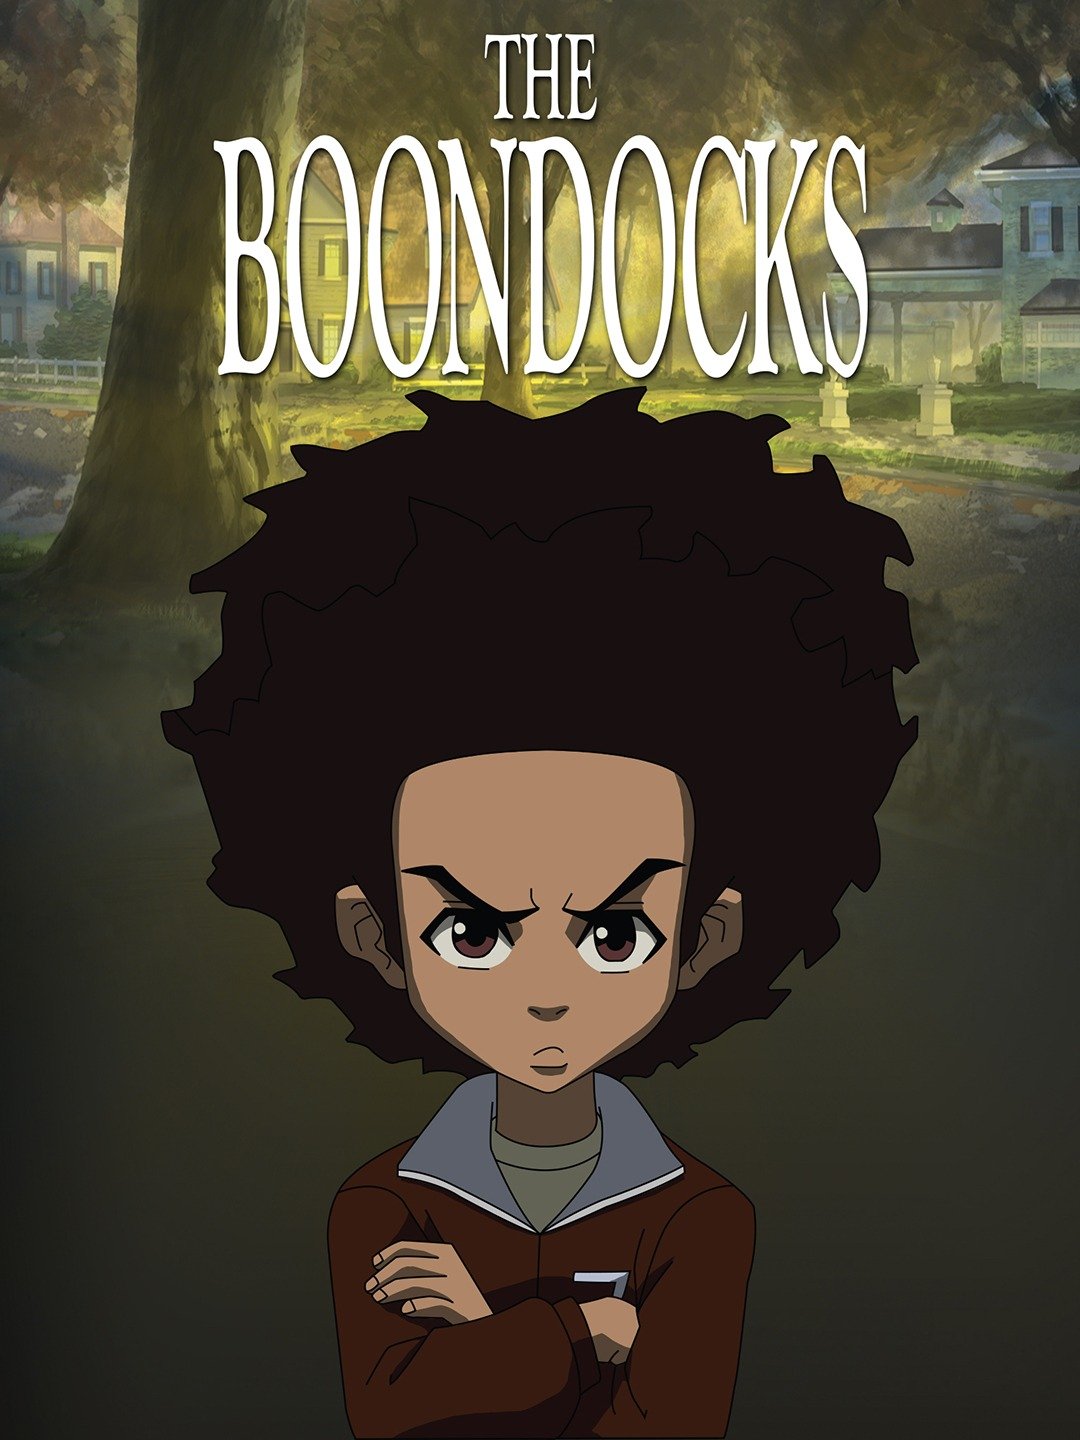 Watching The Boondocks  Anime Transparent PNG  1920x1080  Free Download  on NicePNG